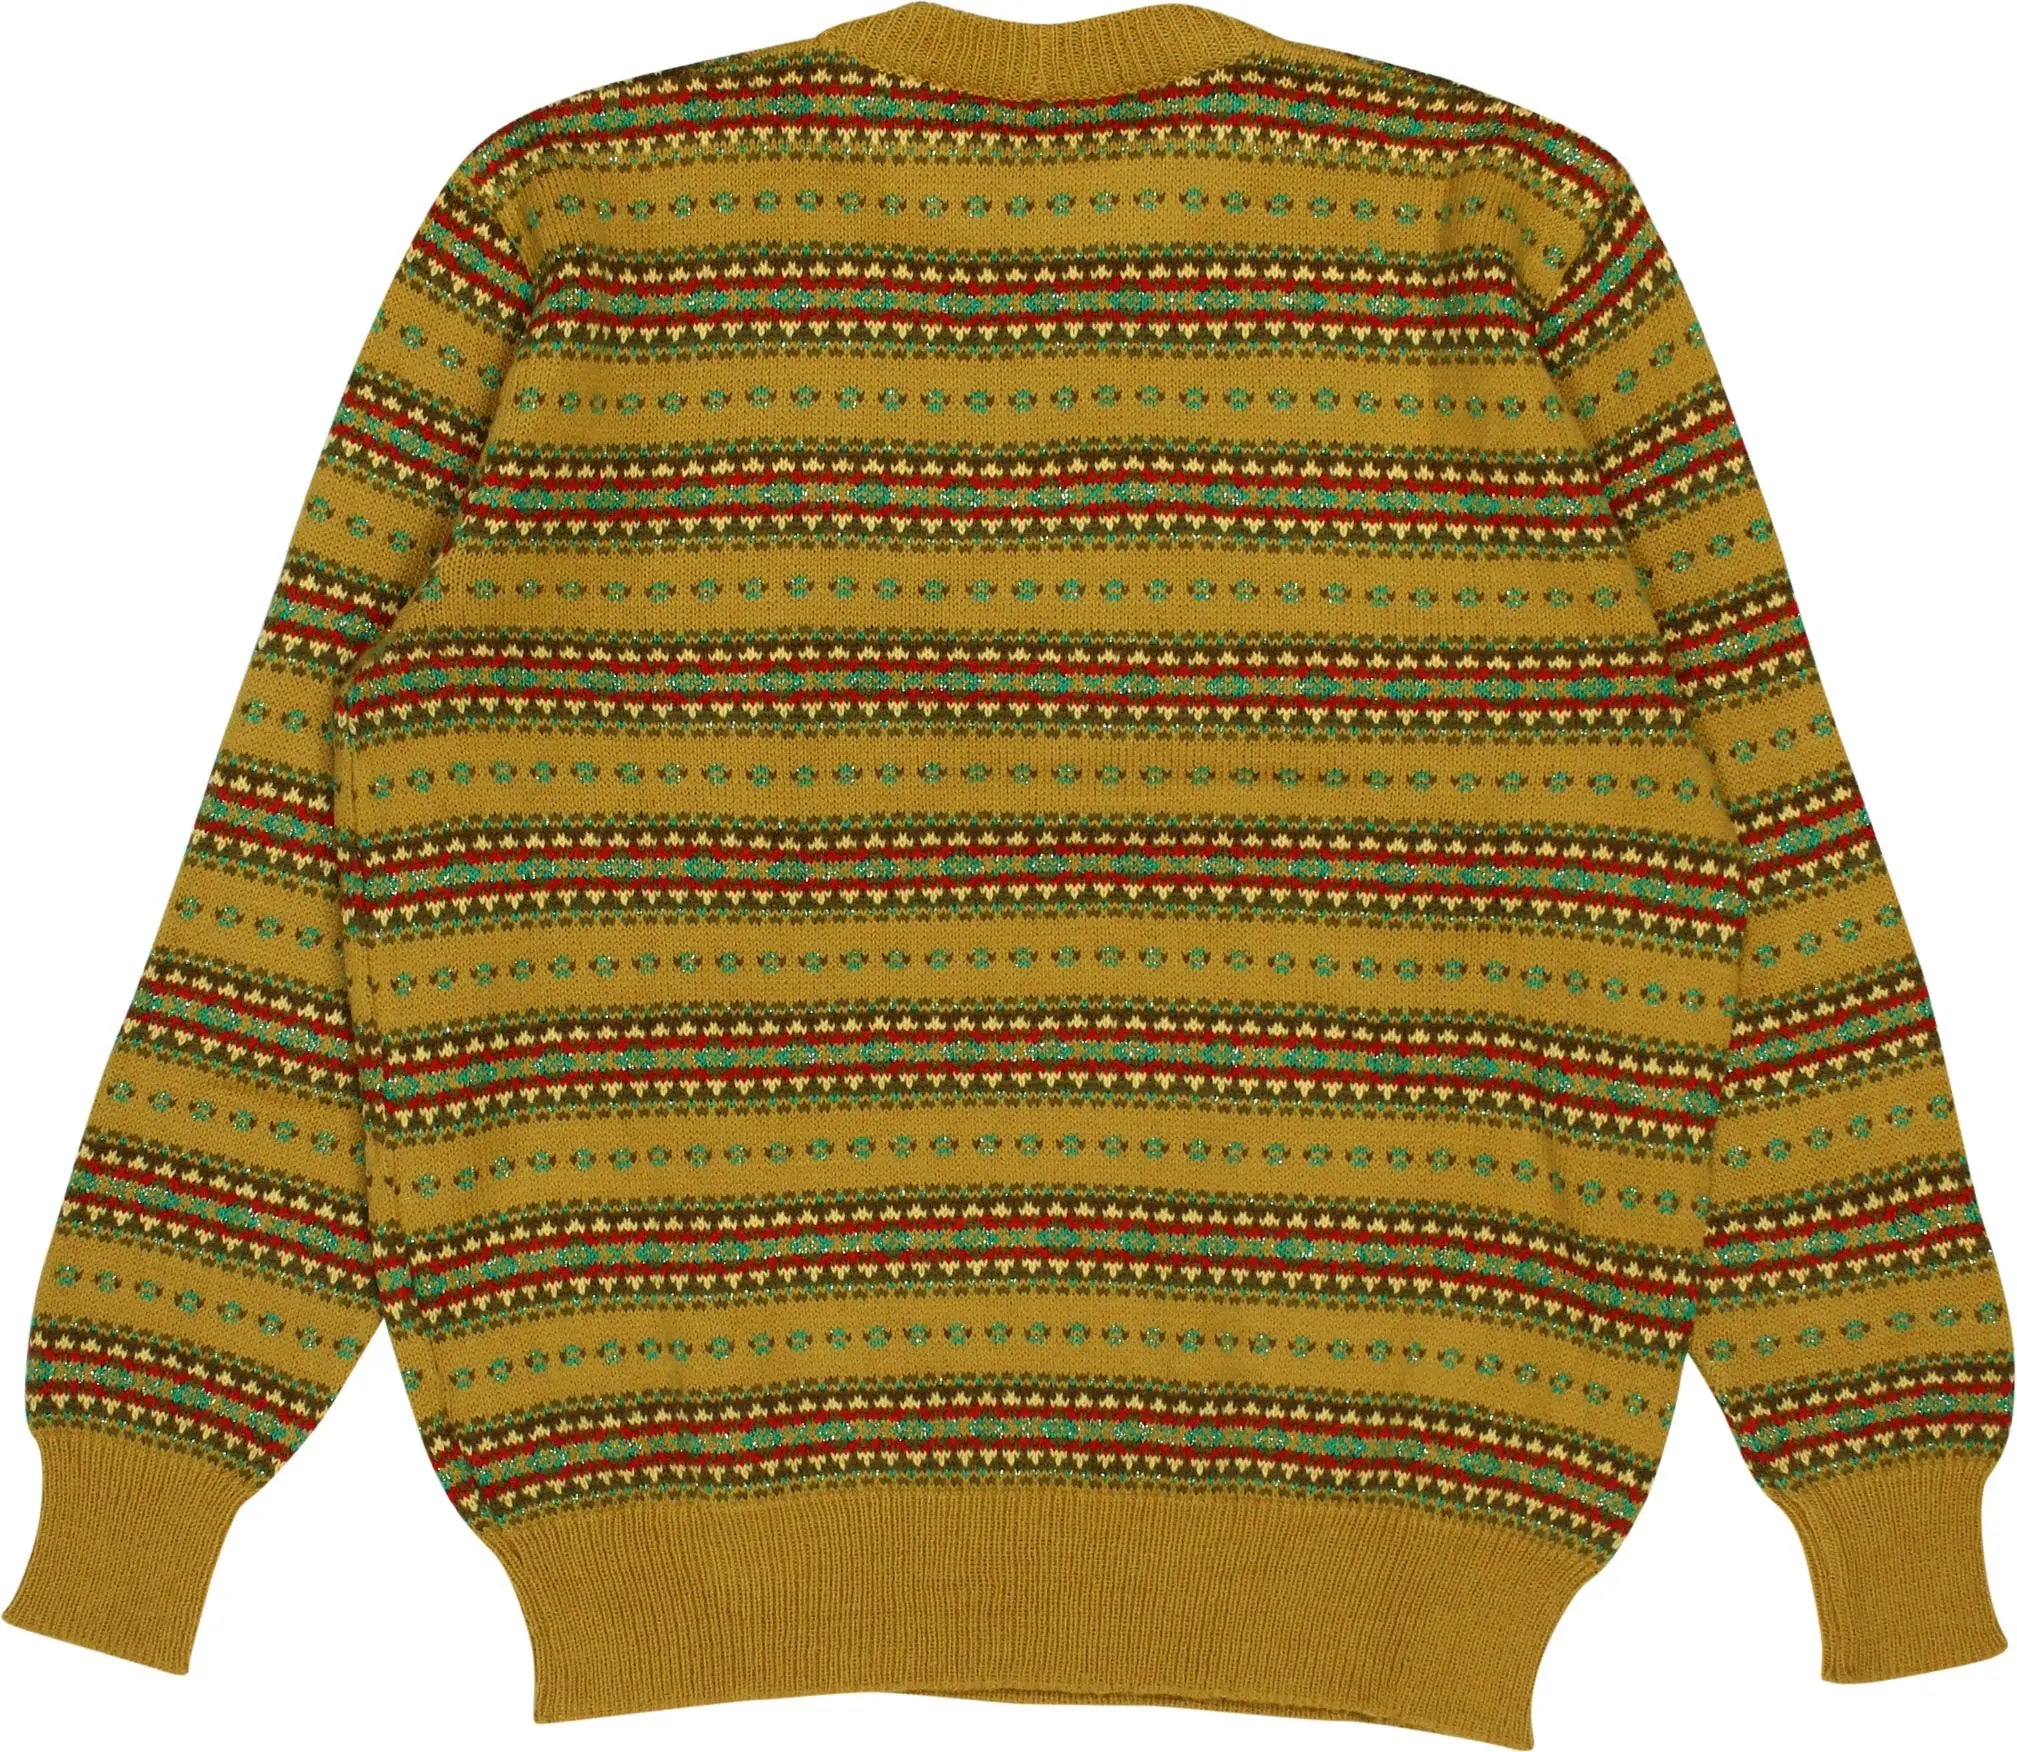 Unknown - Patterned Knitted Jumper- ThriftTale.com - Vintage and second handclothing